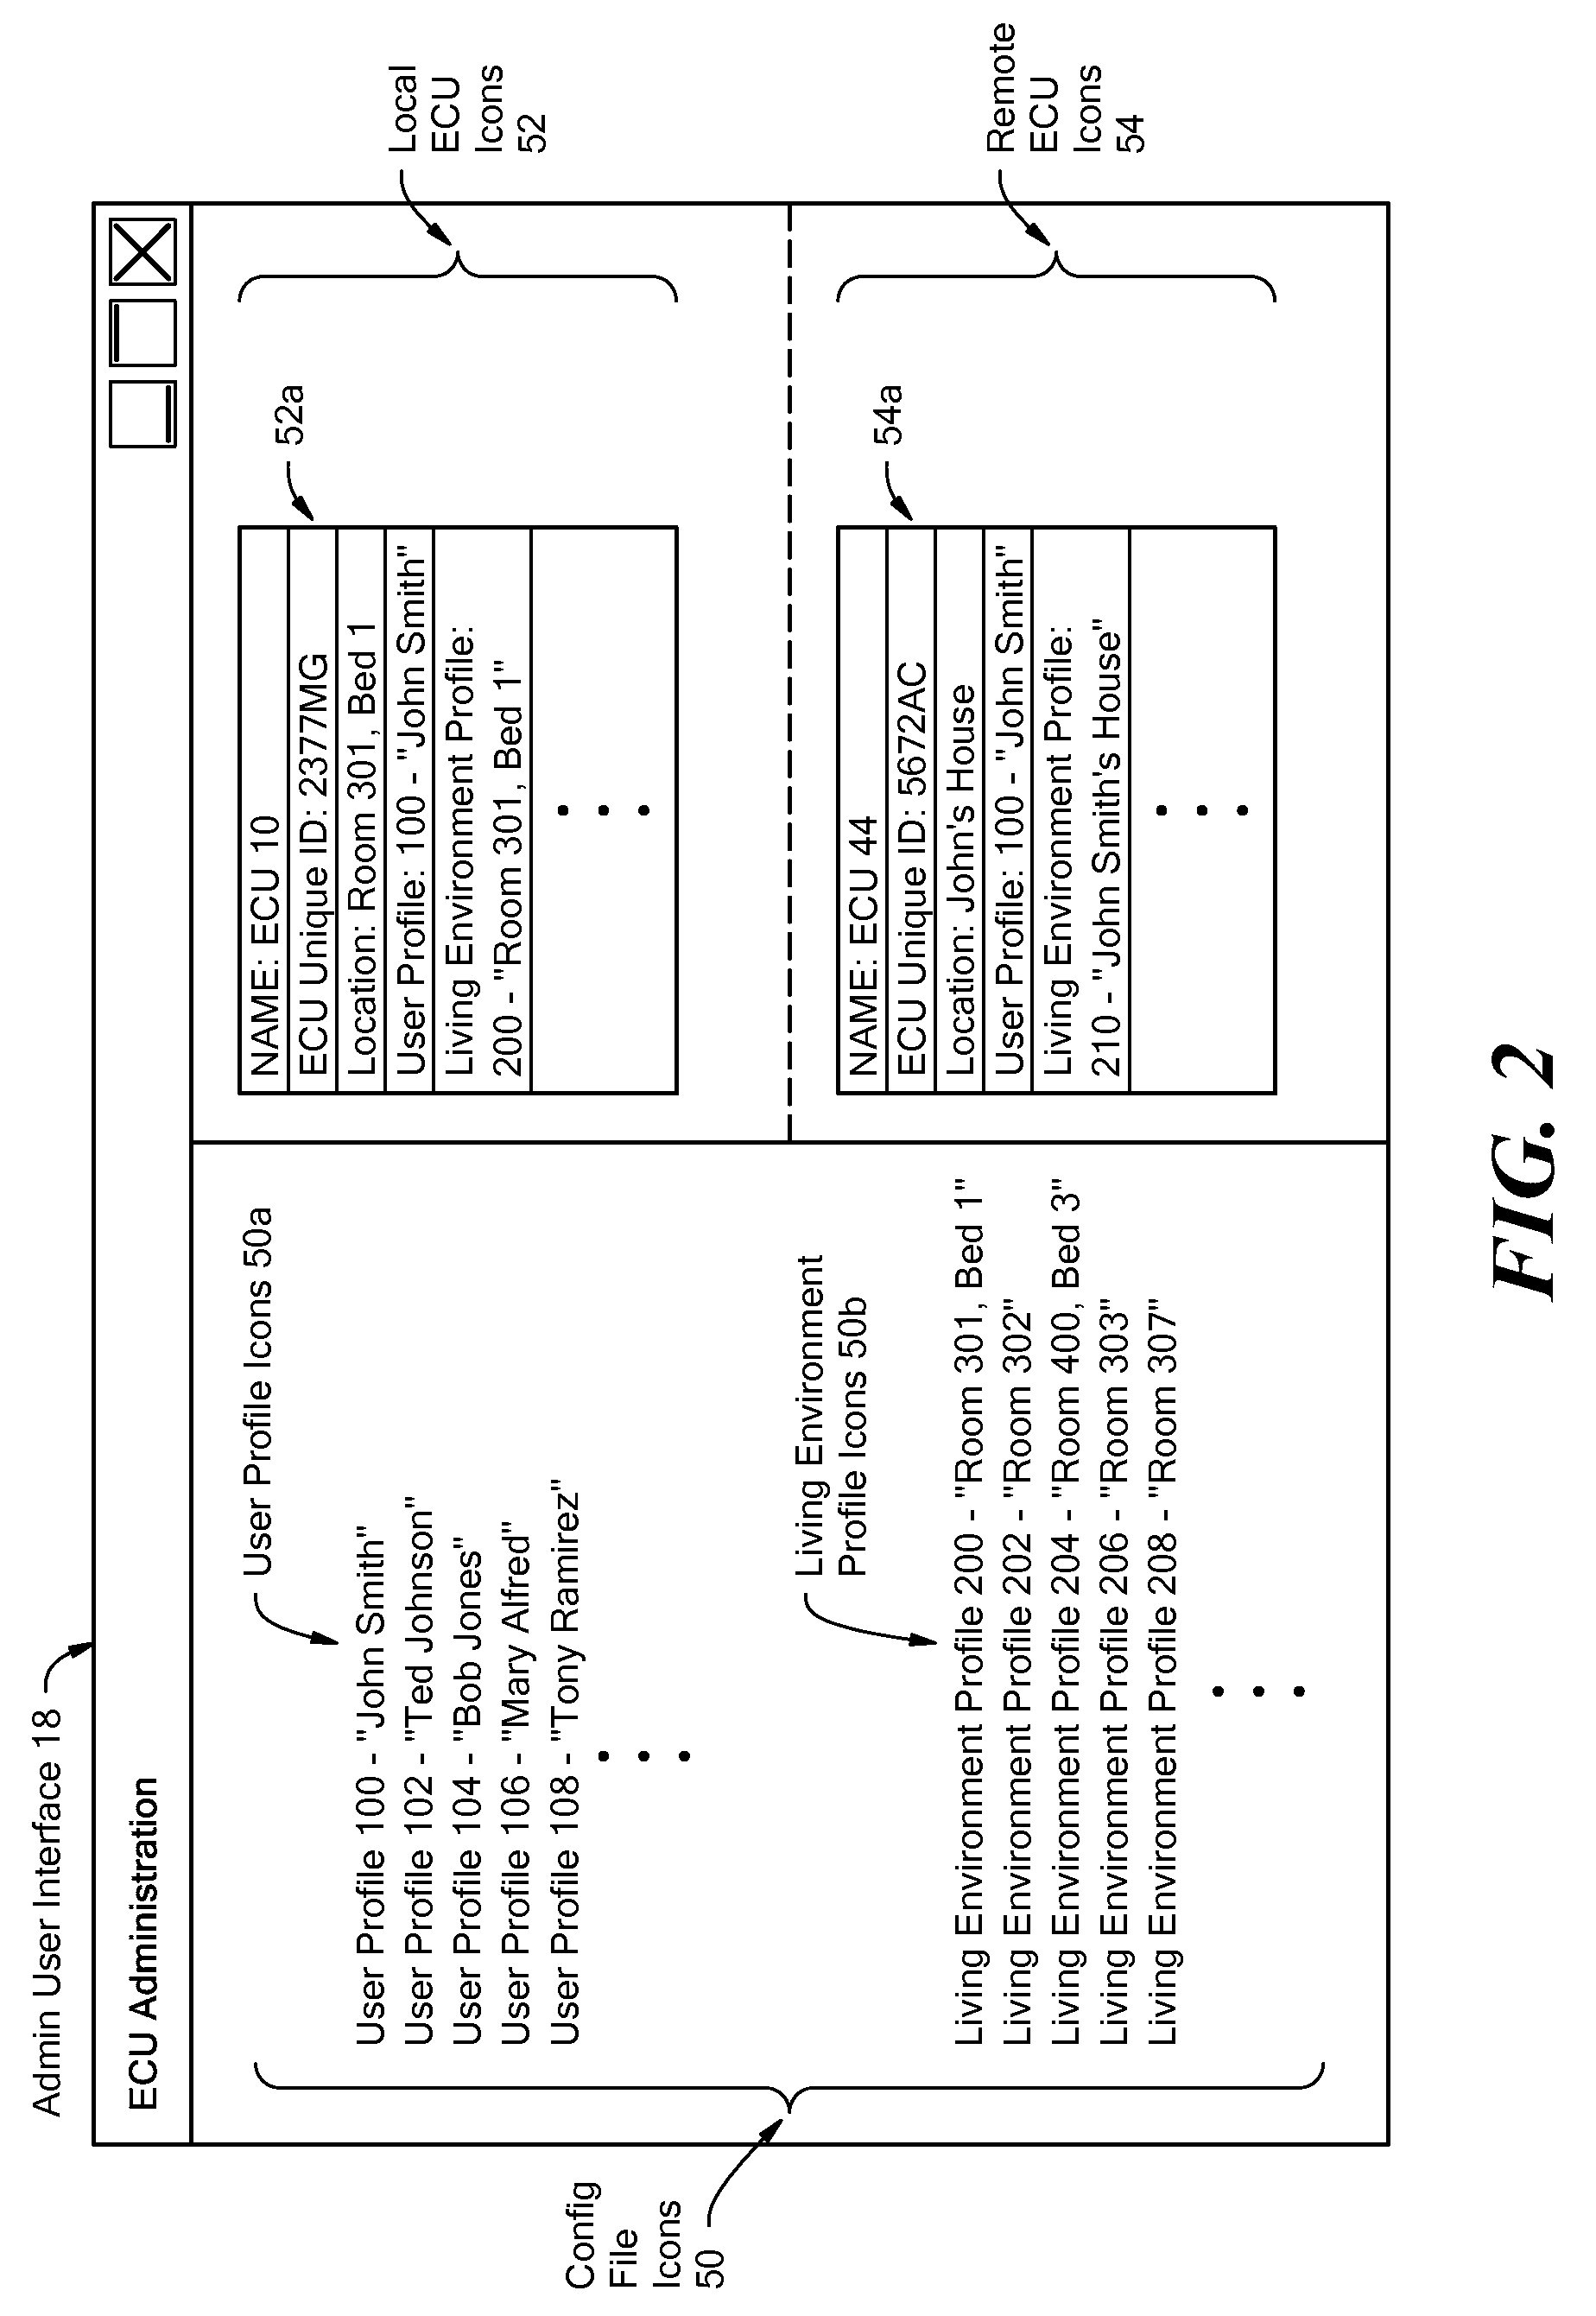 System and method for controlling a network of environmental control units